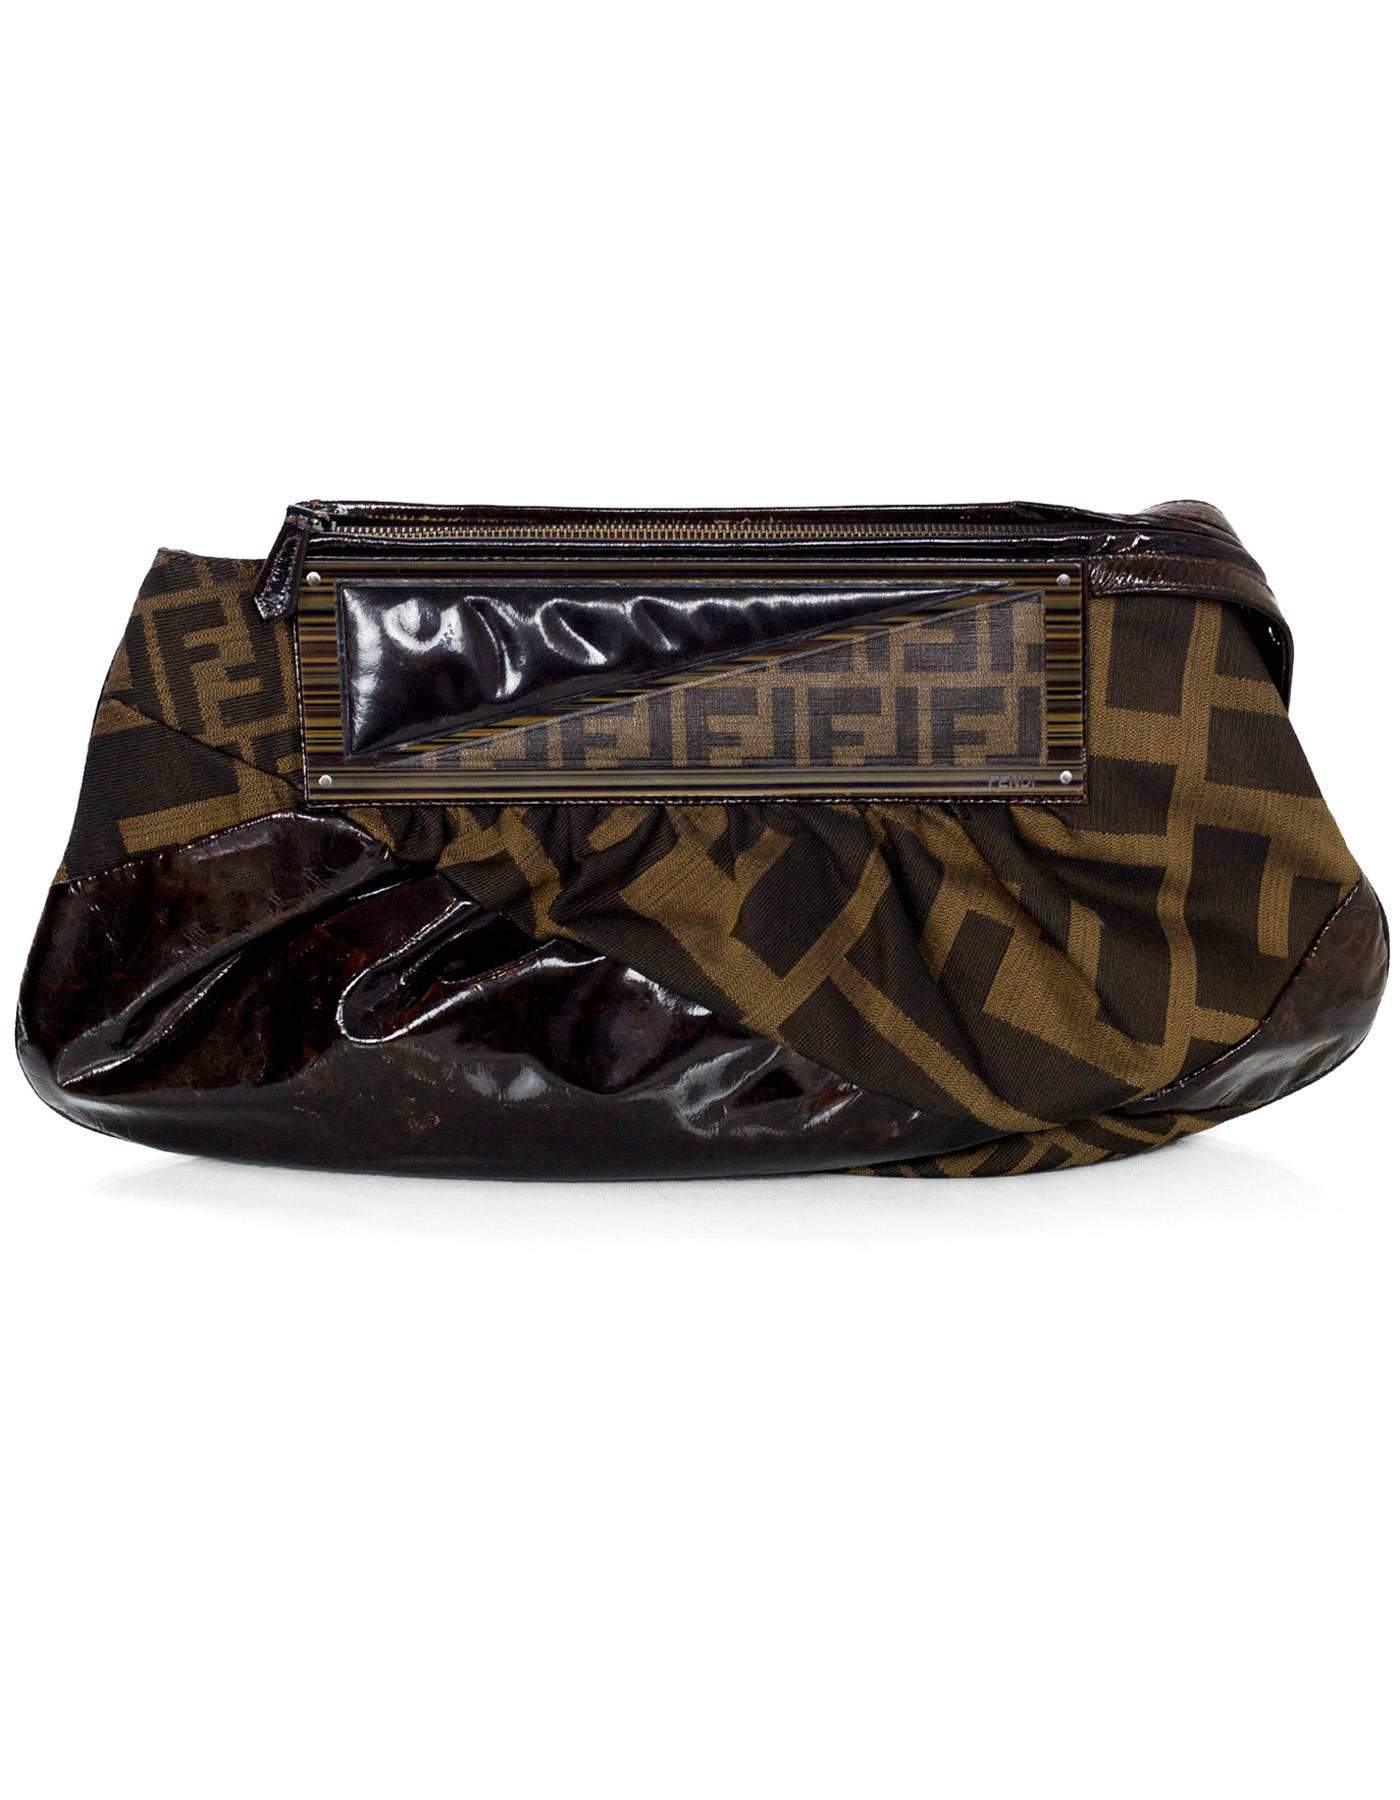 Fendi Brown Borsa Pochette Macrozuc/Tobacco Bag

Made In: Italy
Color: Brown
Hardware: Brass
Materials: Coated canvas, canvas, patent leather
Lining: Black textile
Closure/Opening: Zip top
Exterior Pockets: None
Interior Pockets: Zip wall